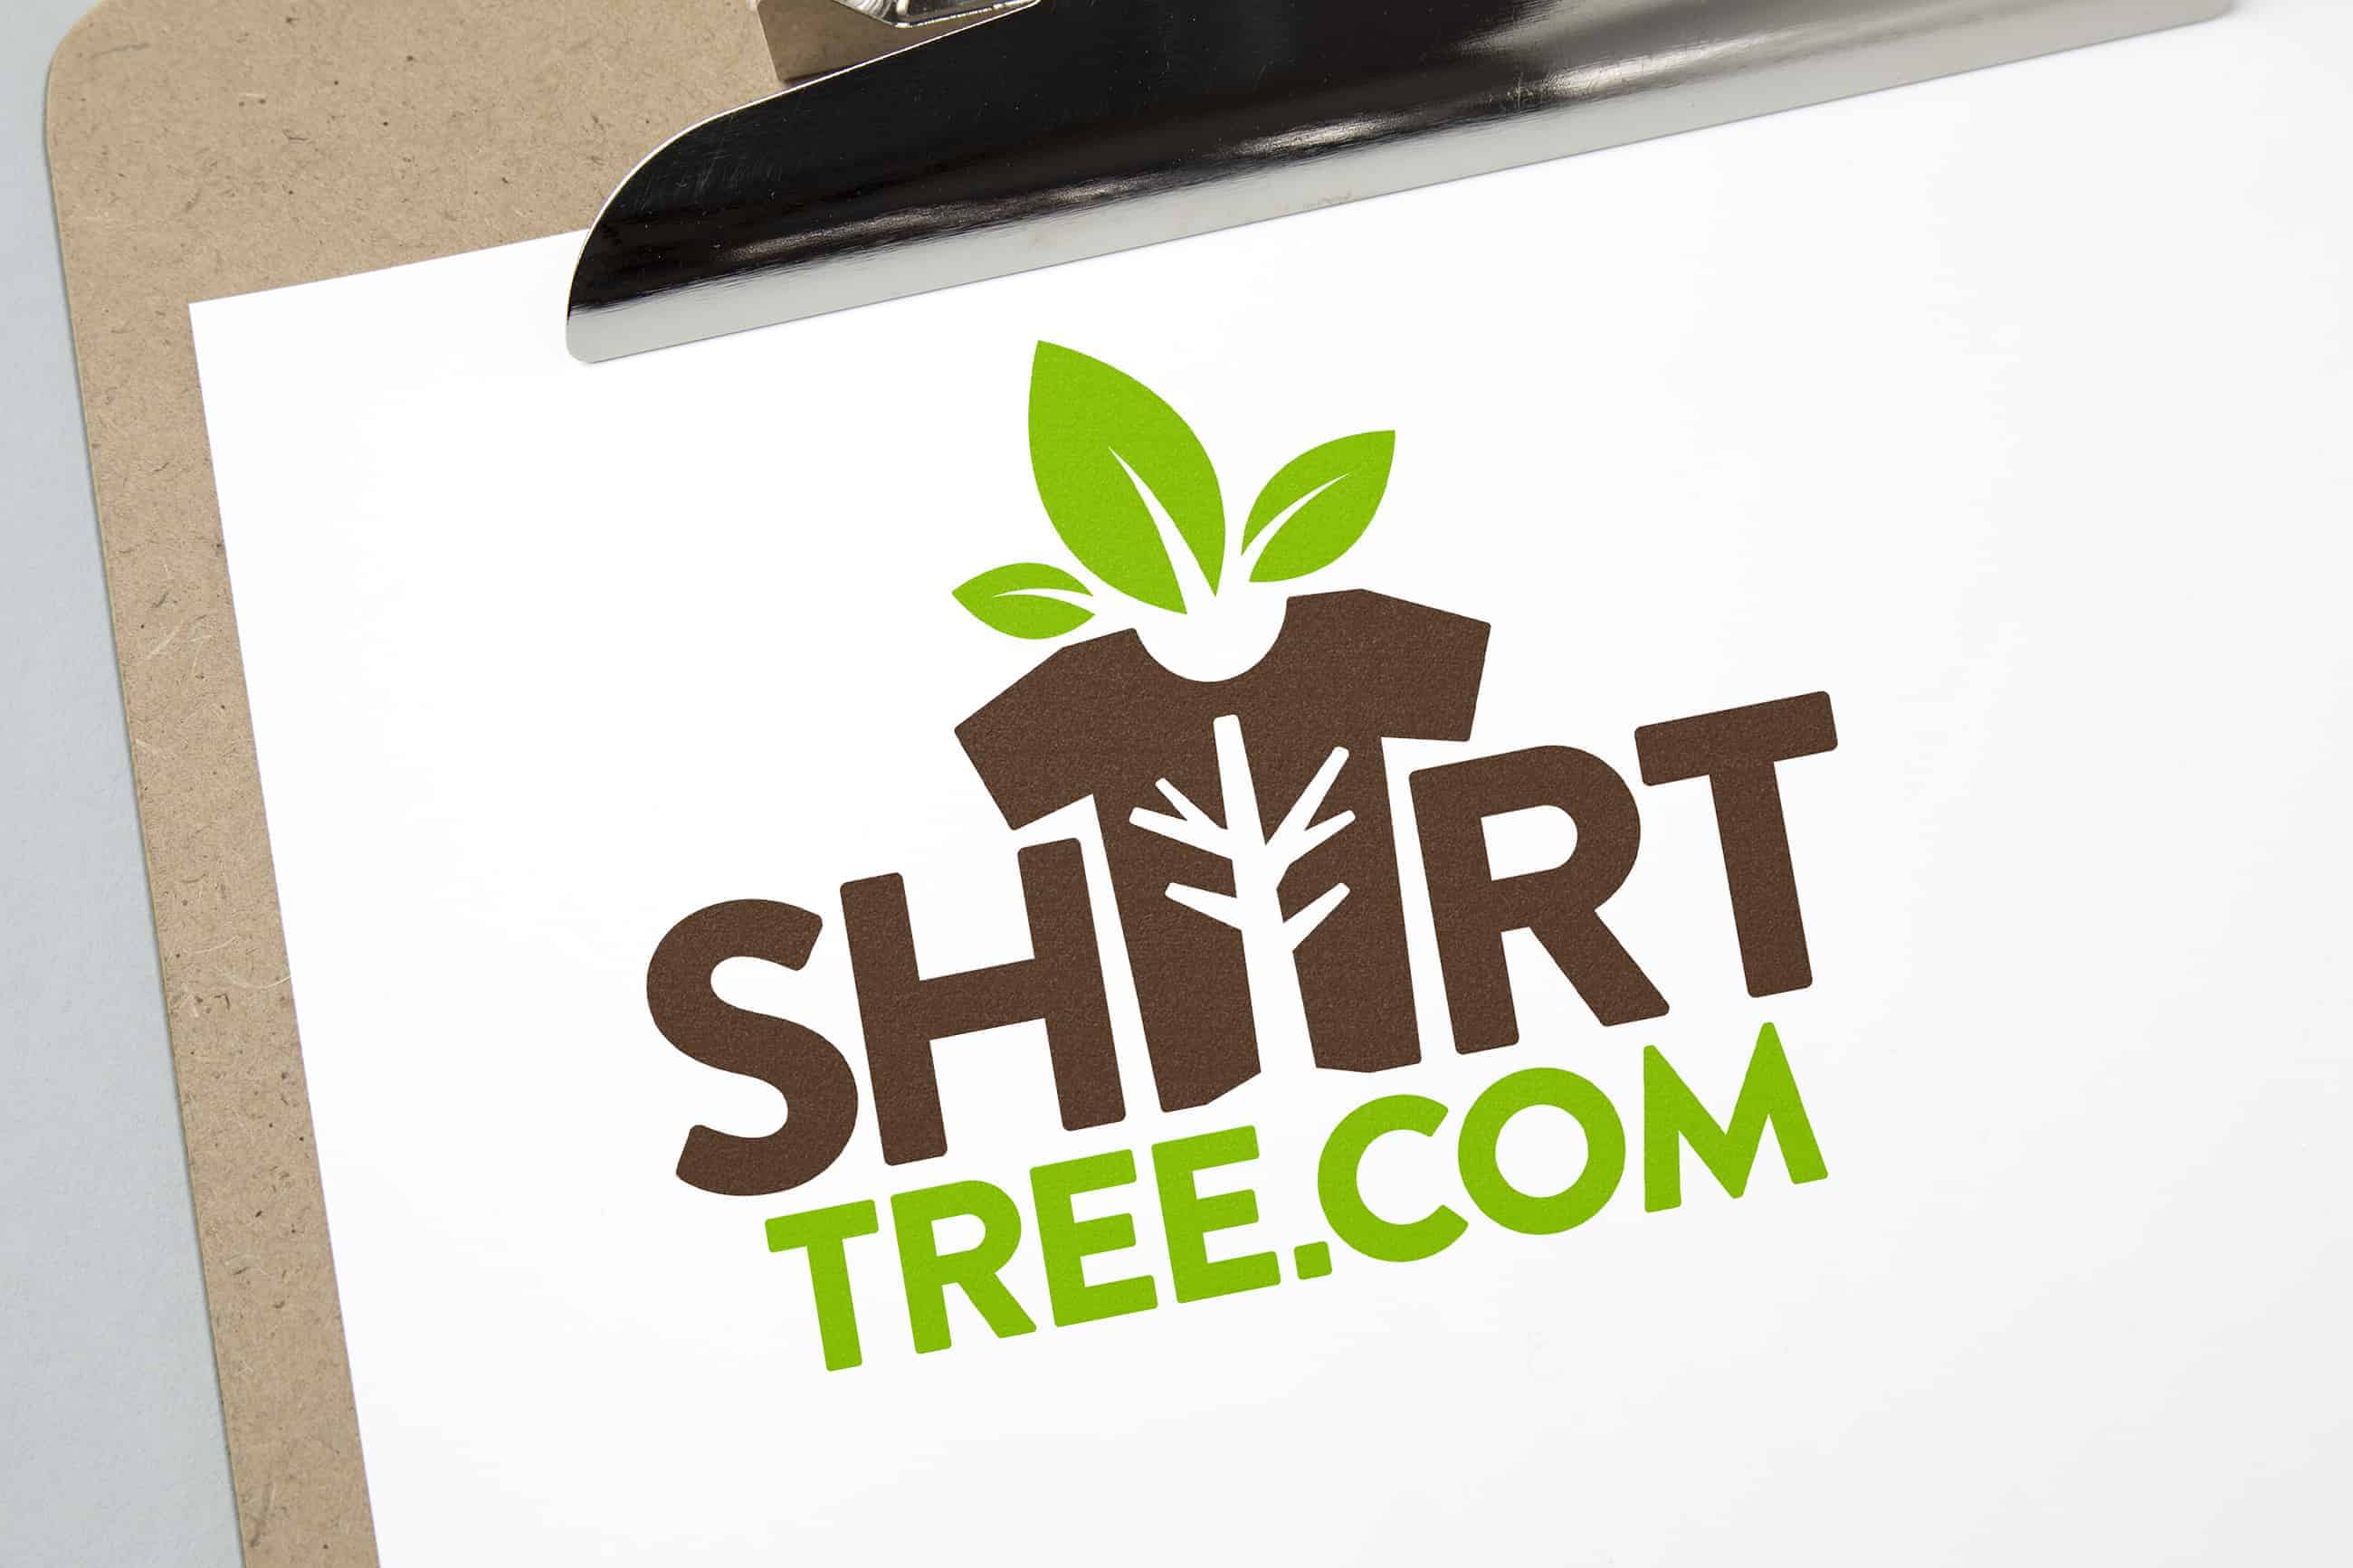 You are currently viewing Shirt Tree